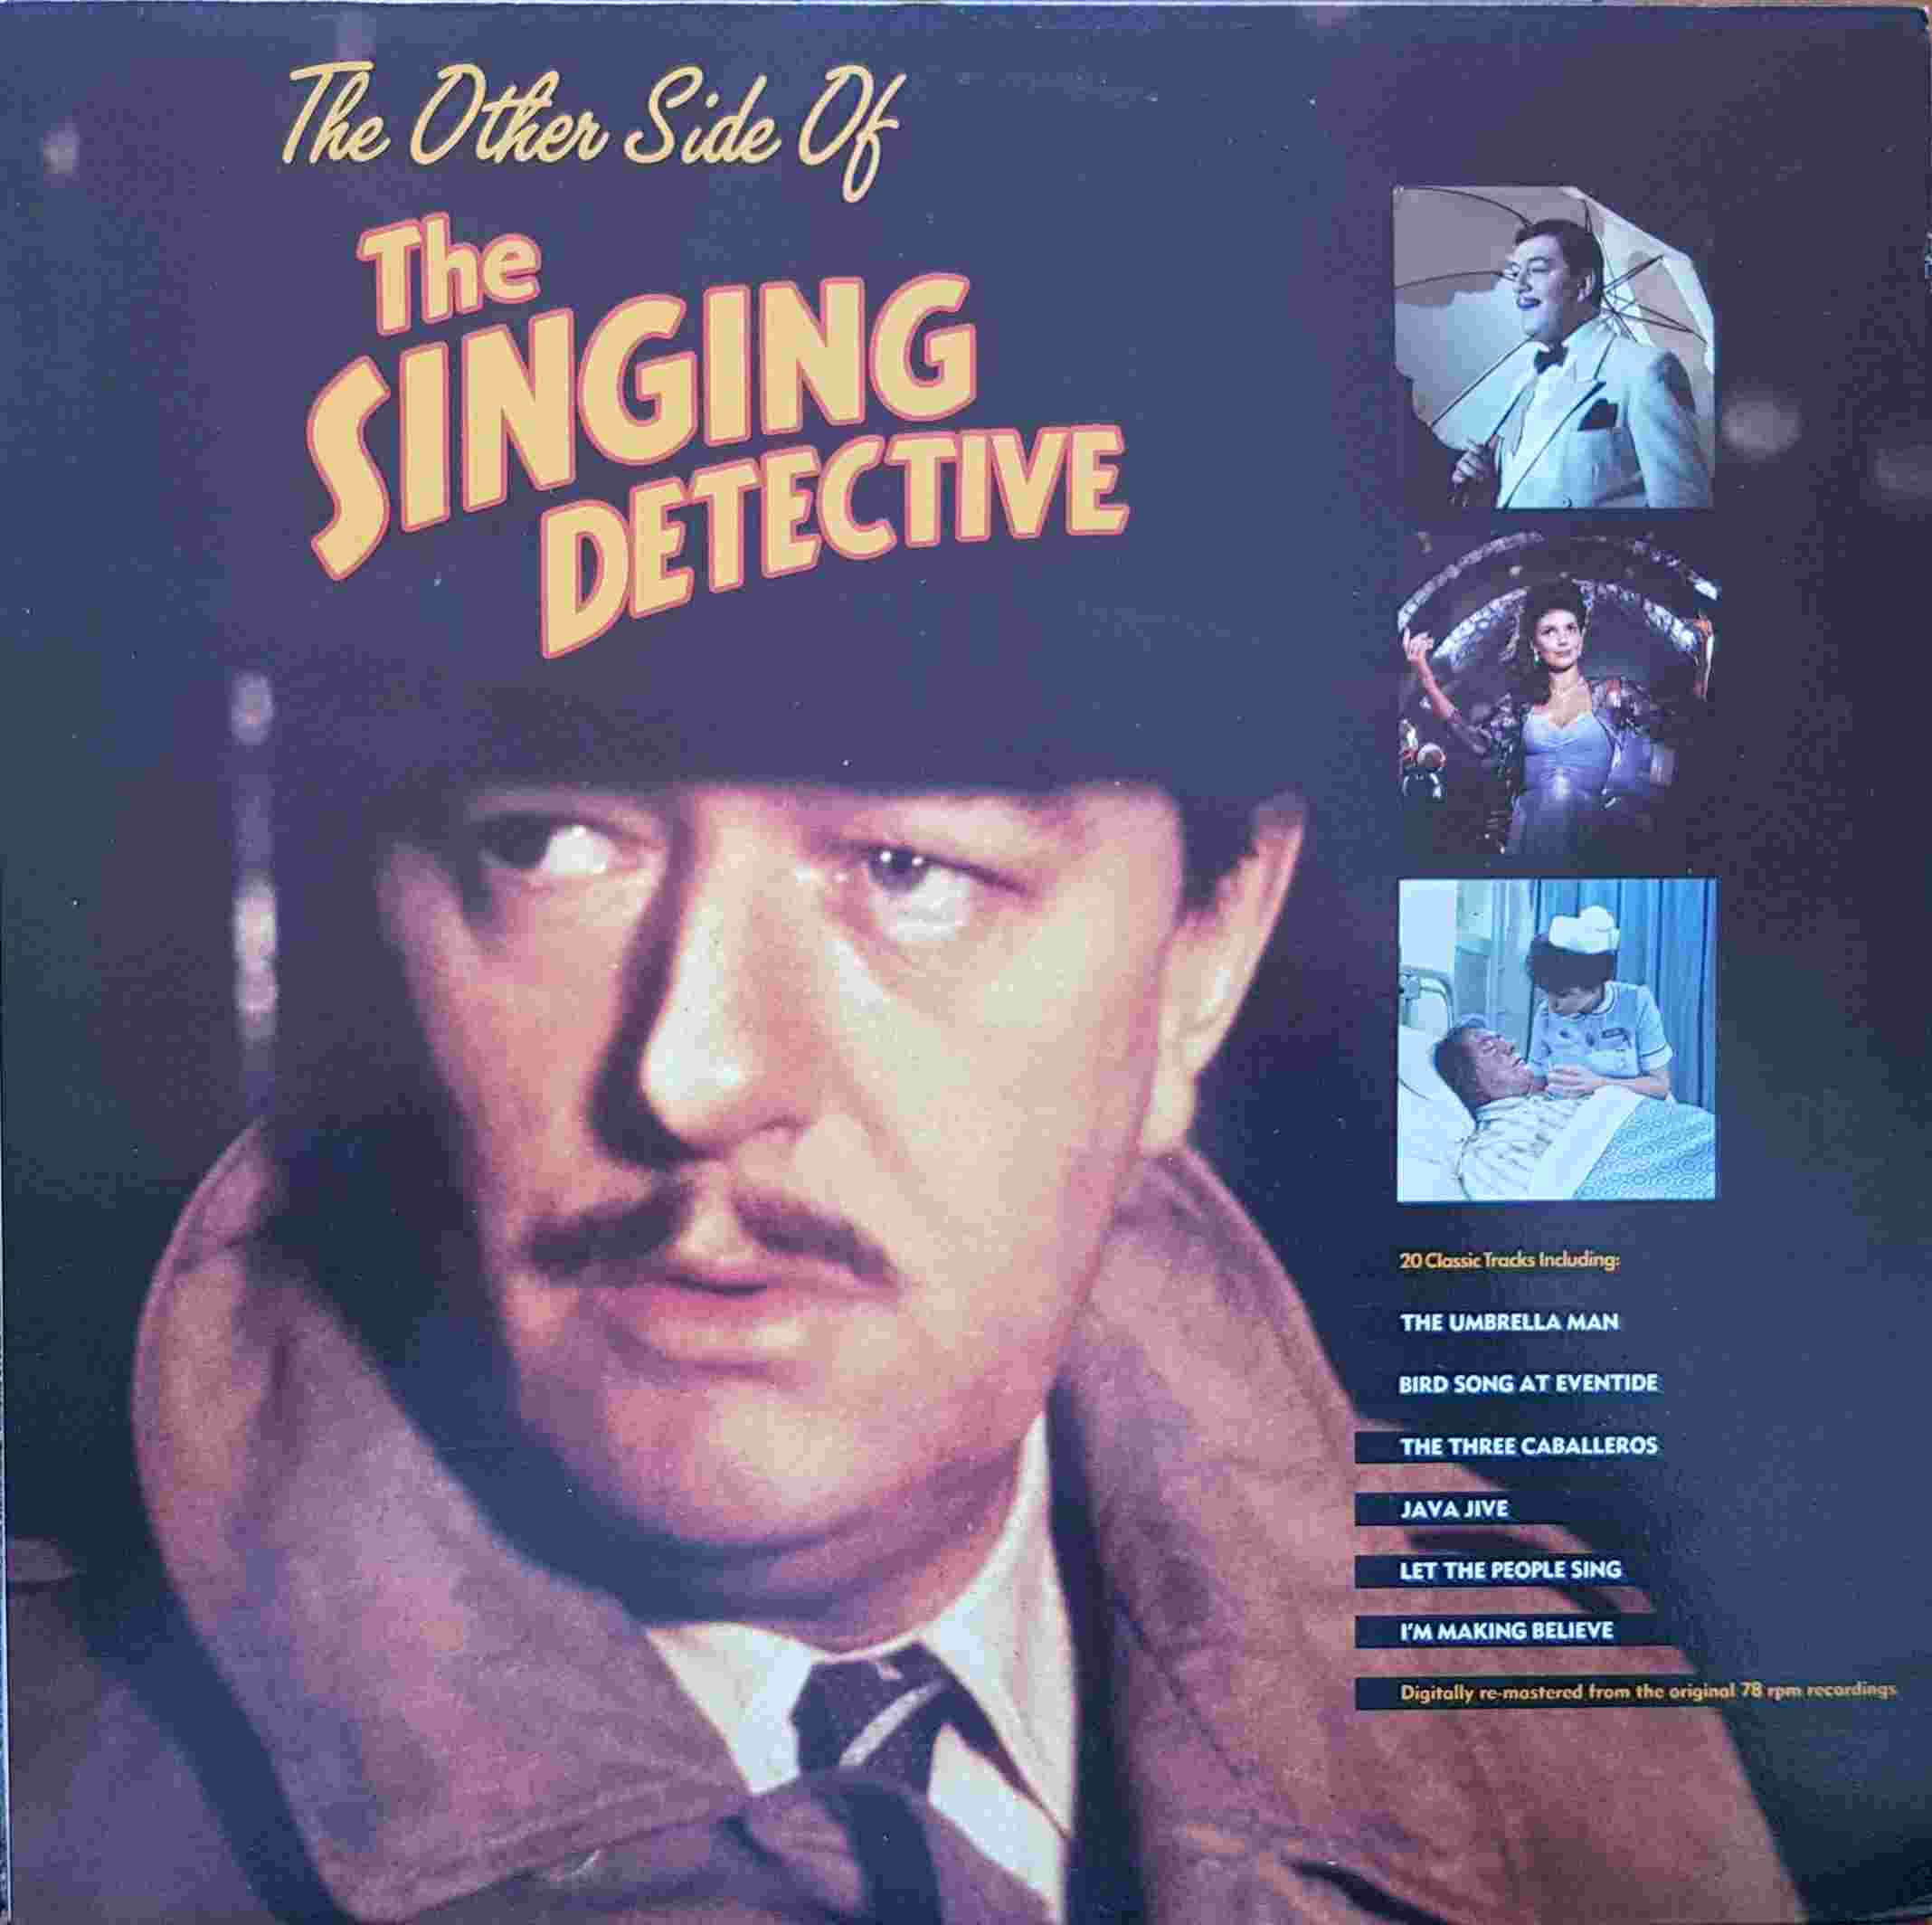 Picture of REN 708 The other side of the singing detective by artist Various from the BBC albums - Records and Tapes library